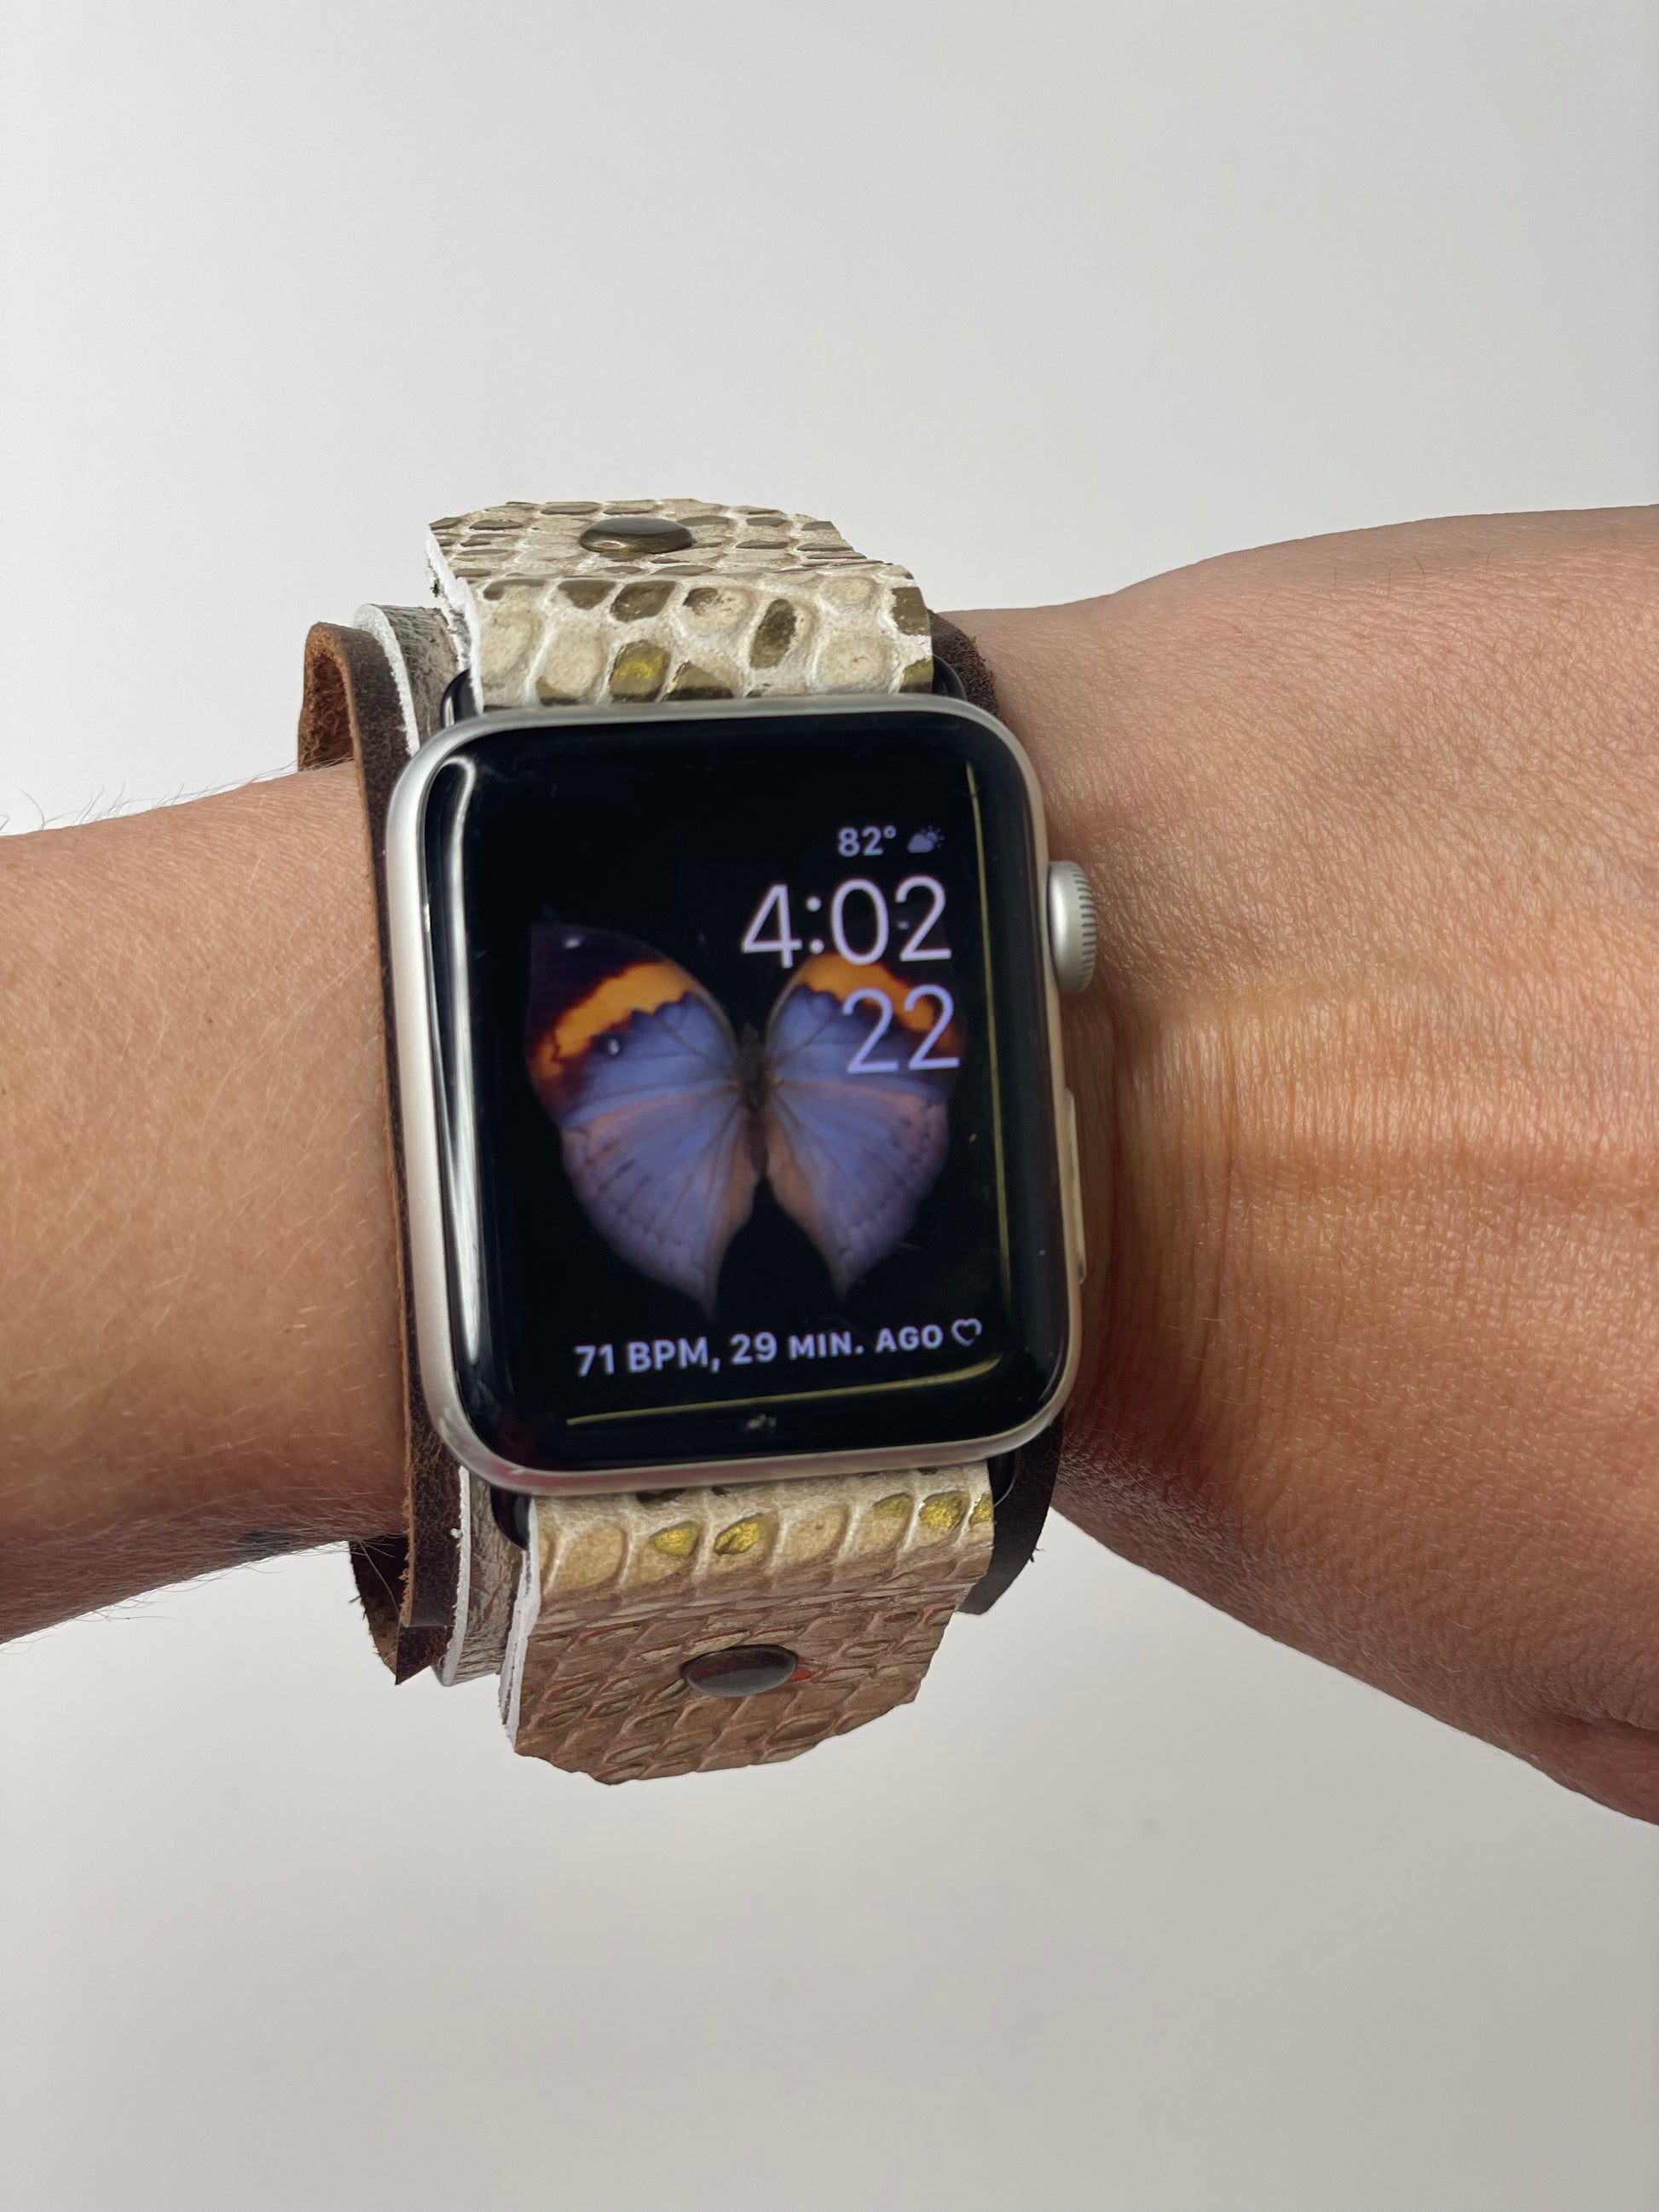 iwatch band with snaps silver with gold Croc accents (large) - Patches Of Upcycling